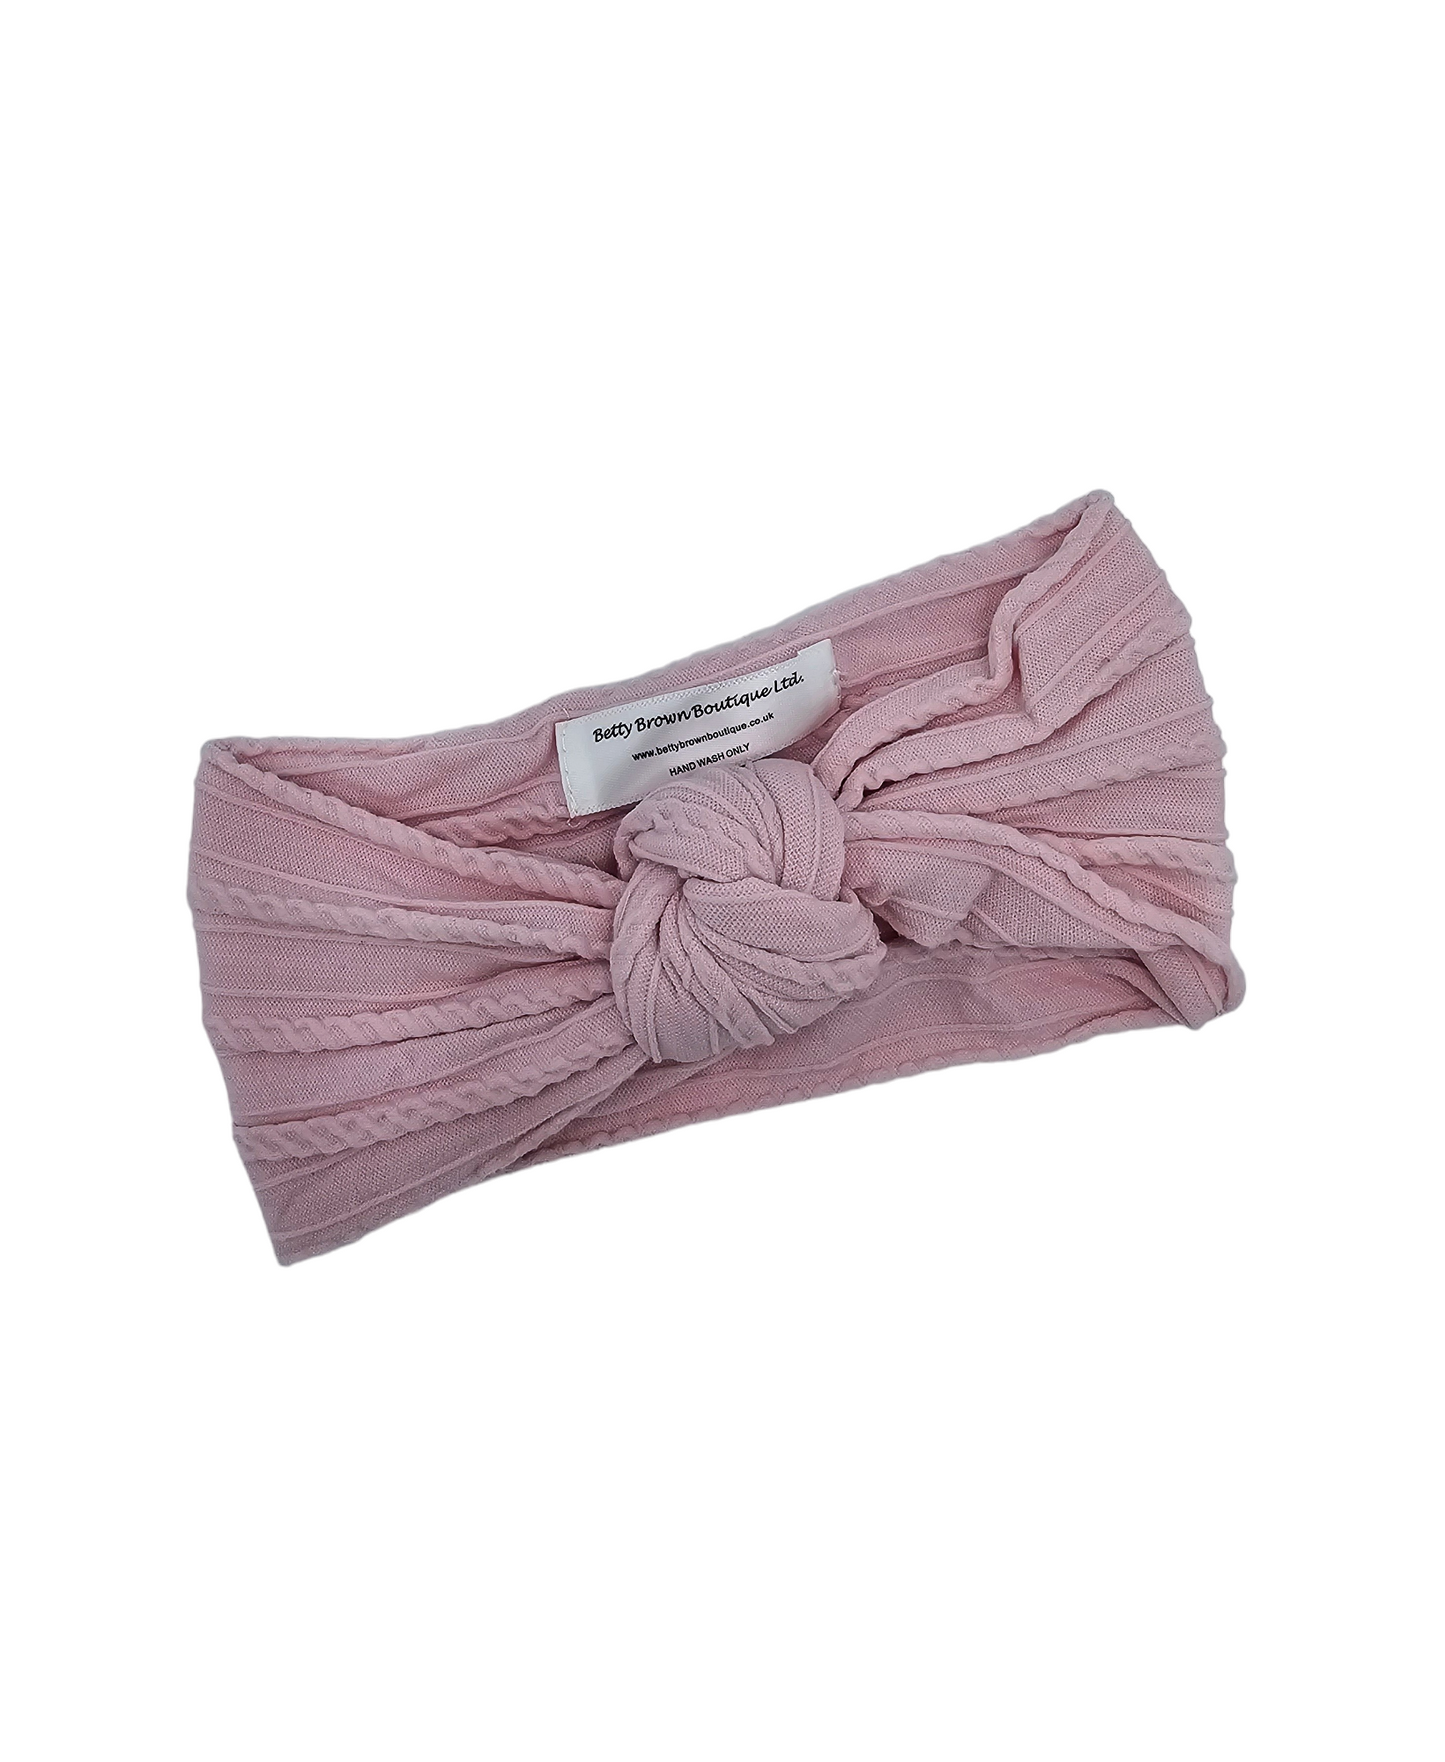 Blush Pink Cable Knit Knot Headwrap - Betty Brown Boutique Ltd